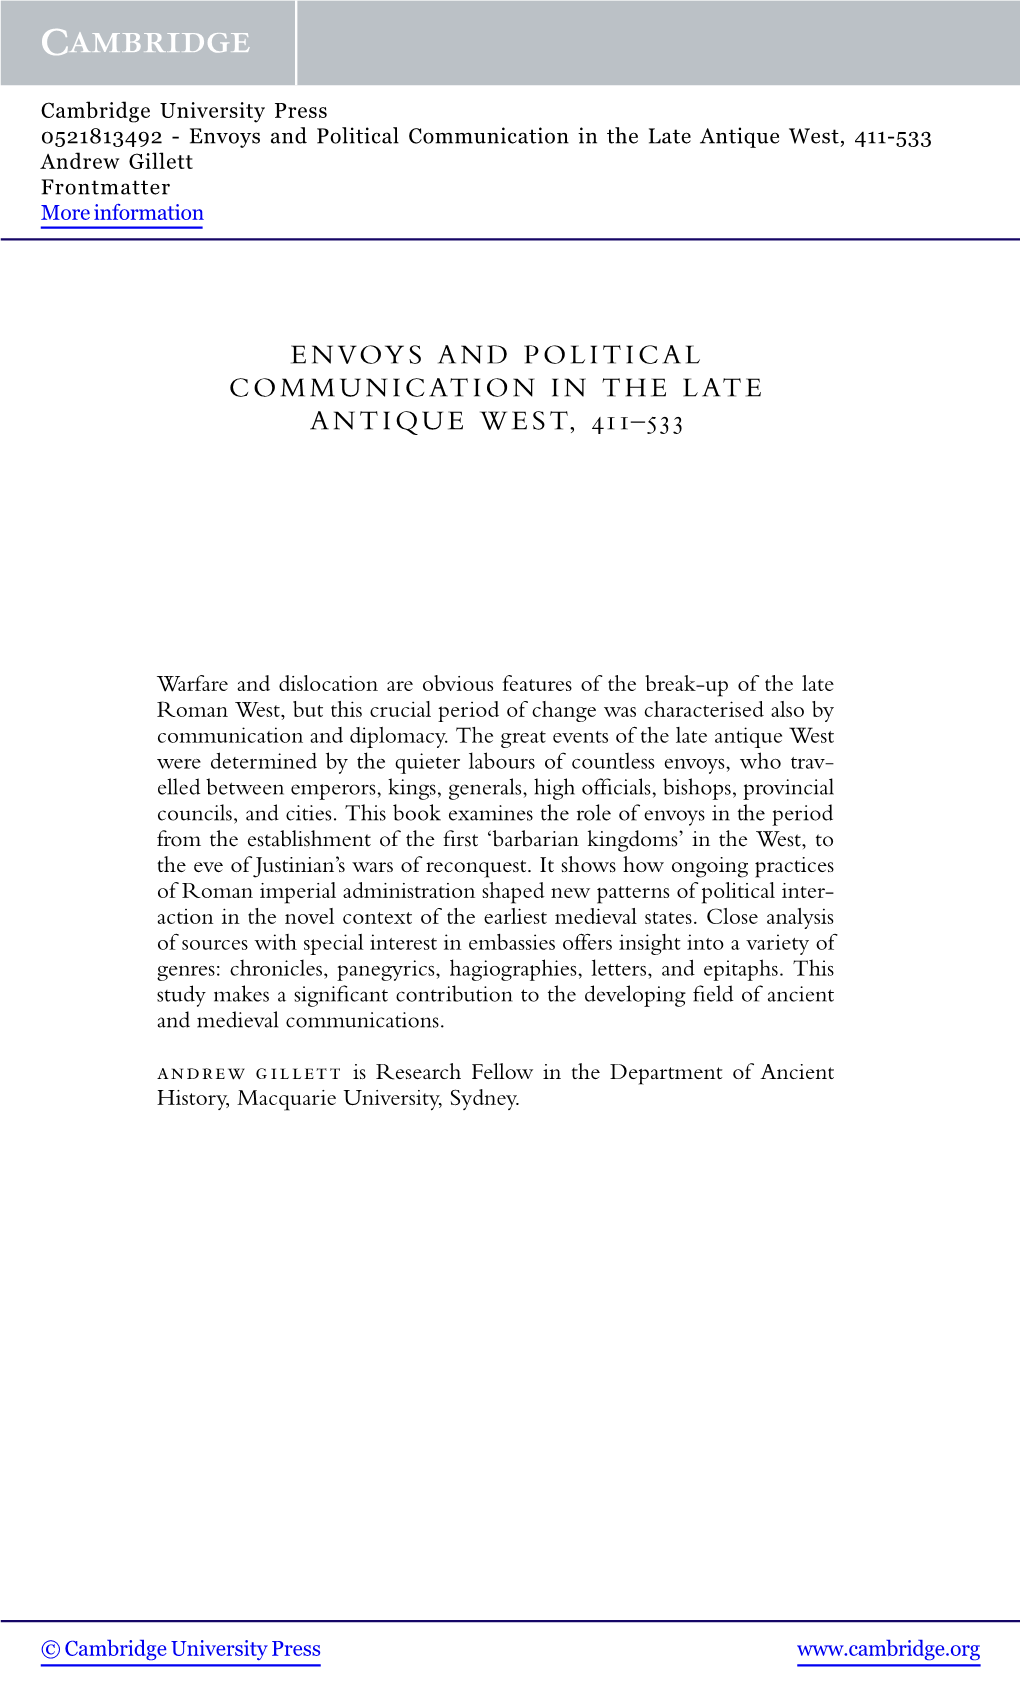 Envoys and Political Communication in the Late Antique West, 411-533 Andrew Gillett Frontmatter More Information